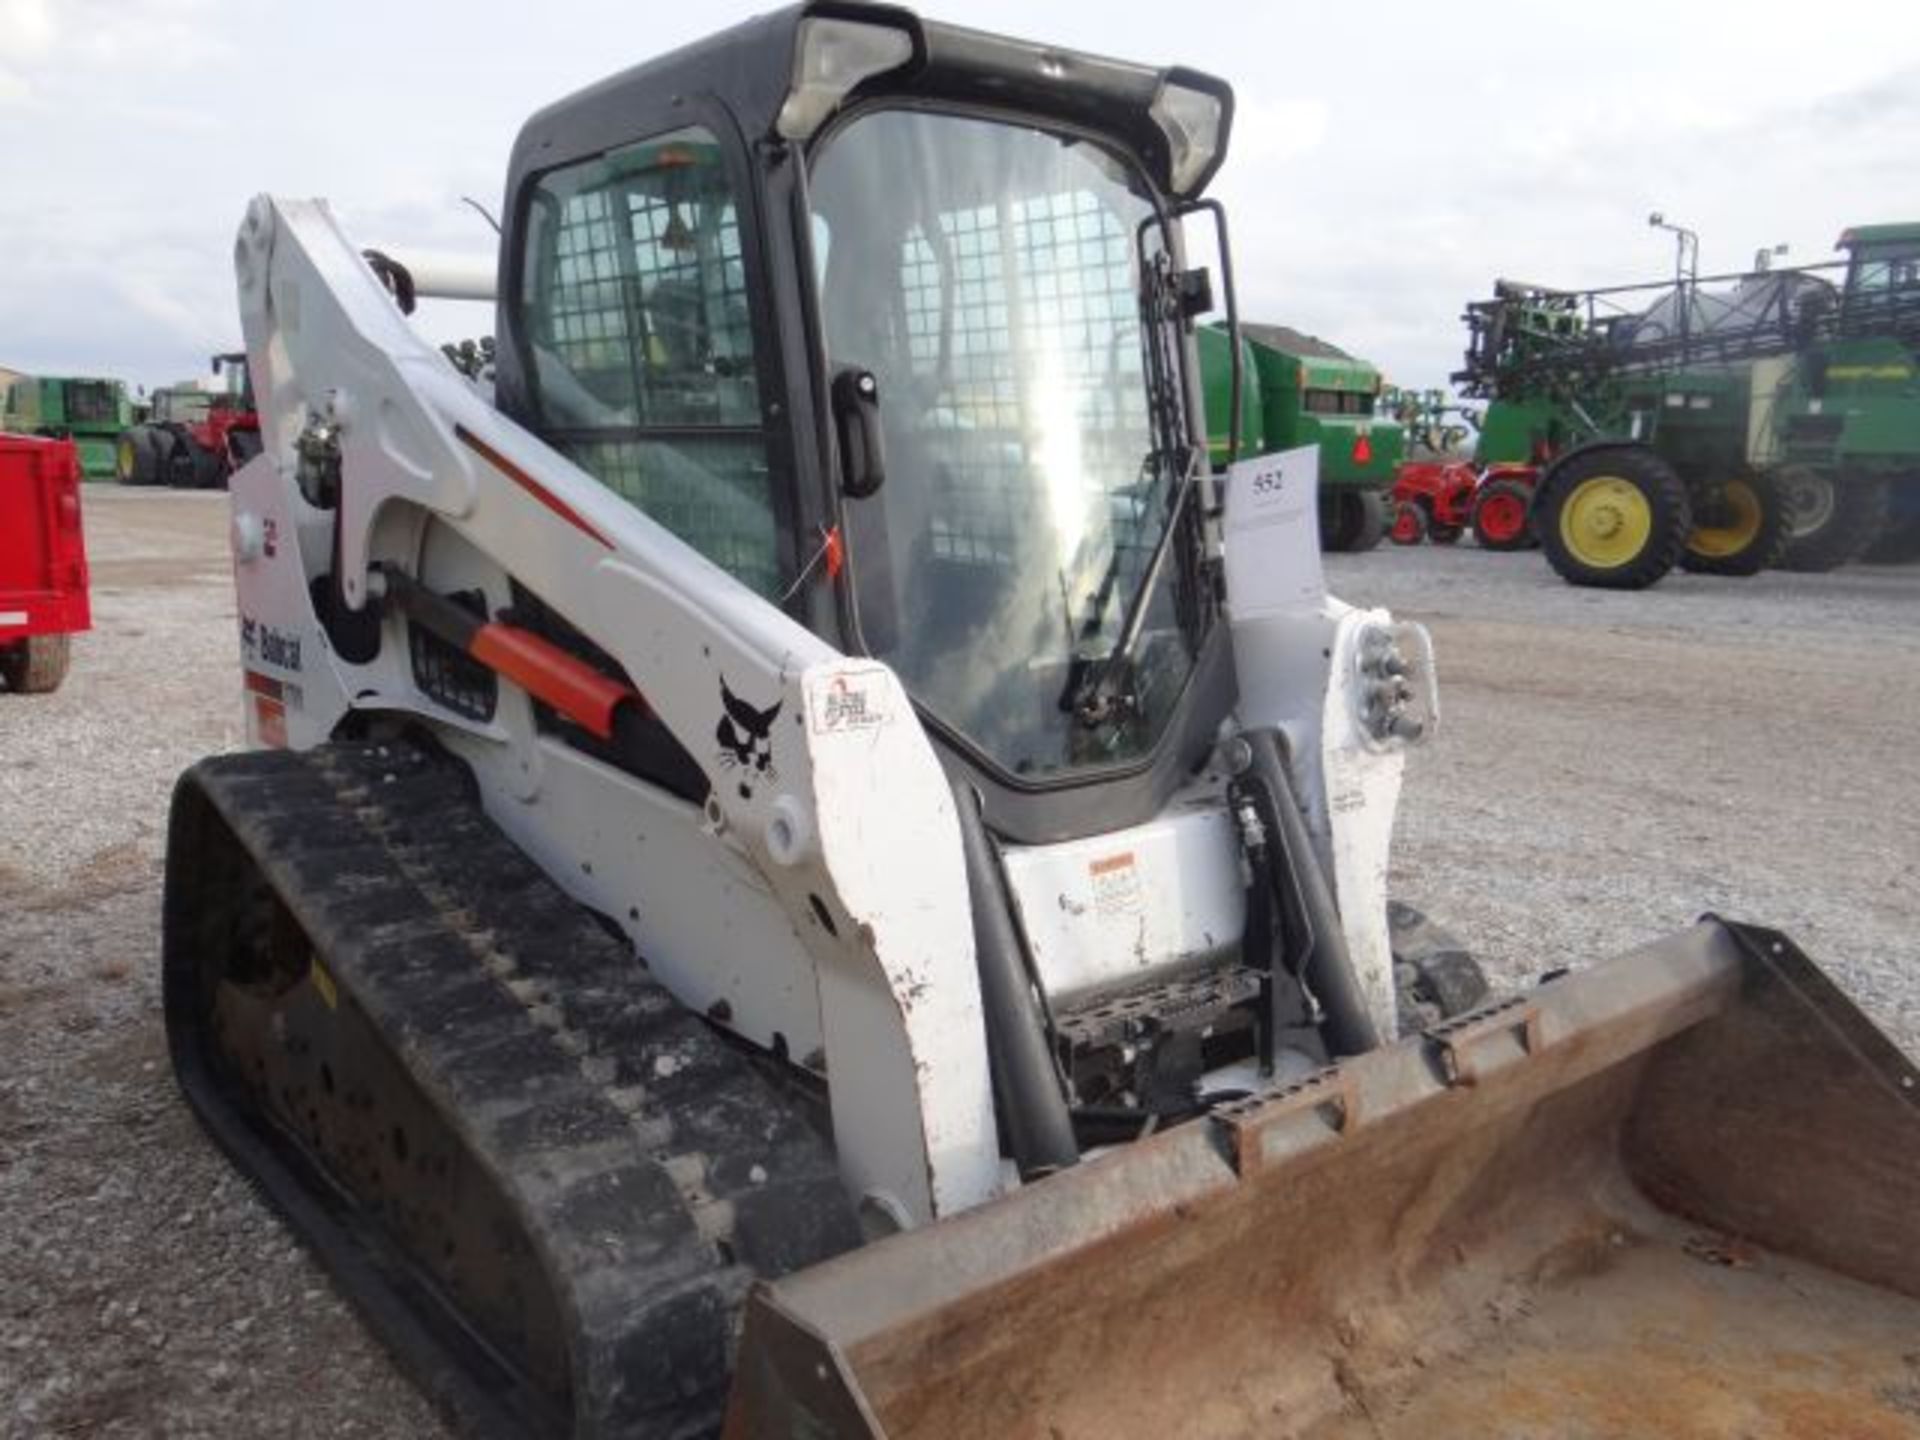 Bobcat T750, 2014 #158901, CTL, Cab w/ AC and Heat, Joystick Controls Switchable From ISO and H